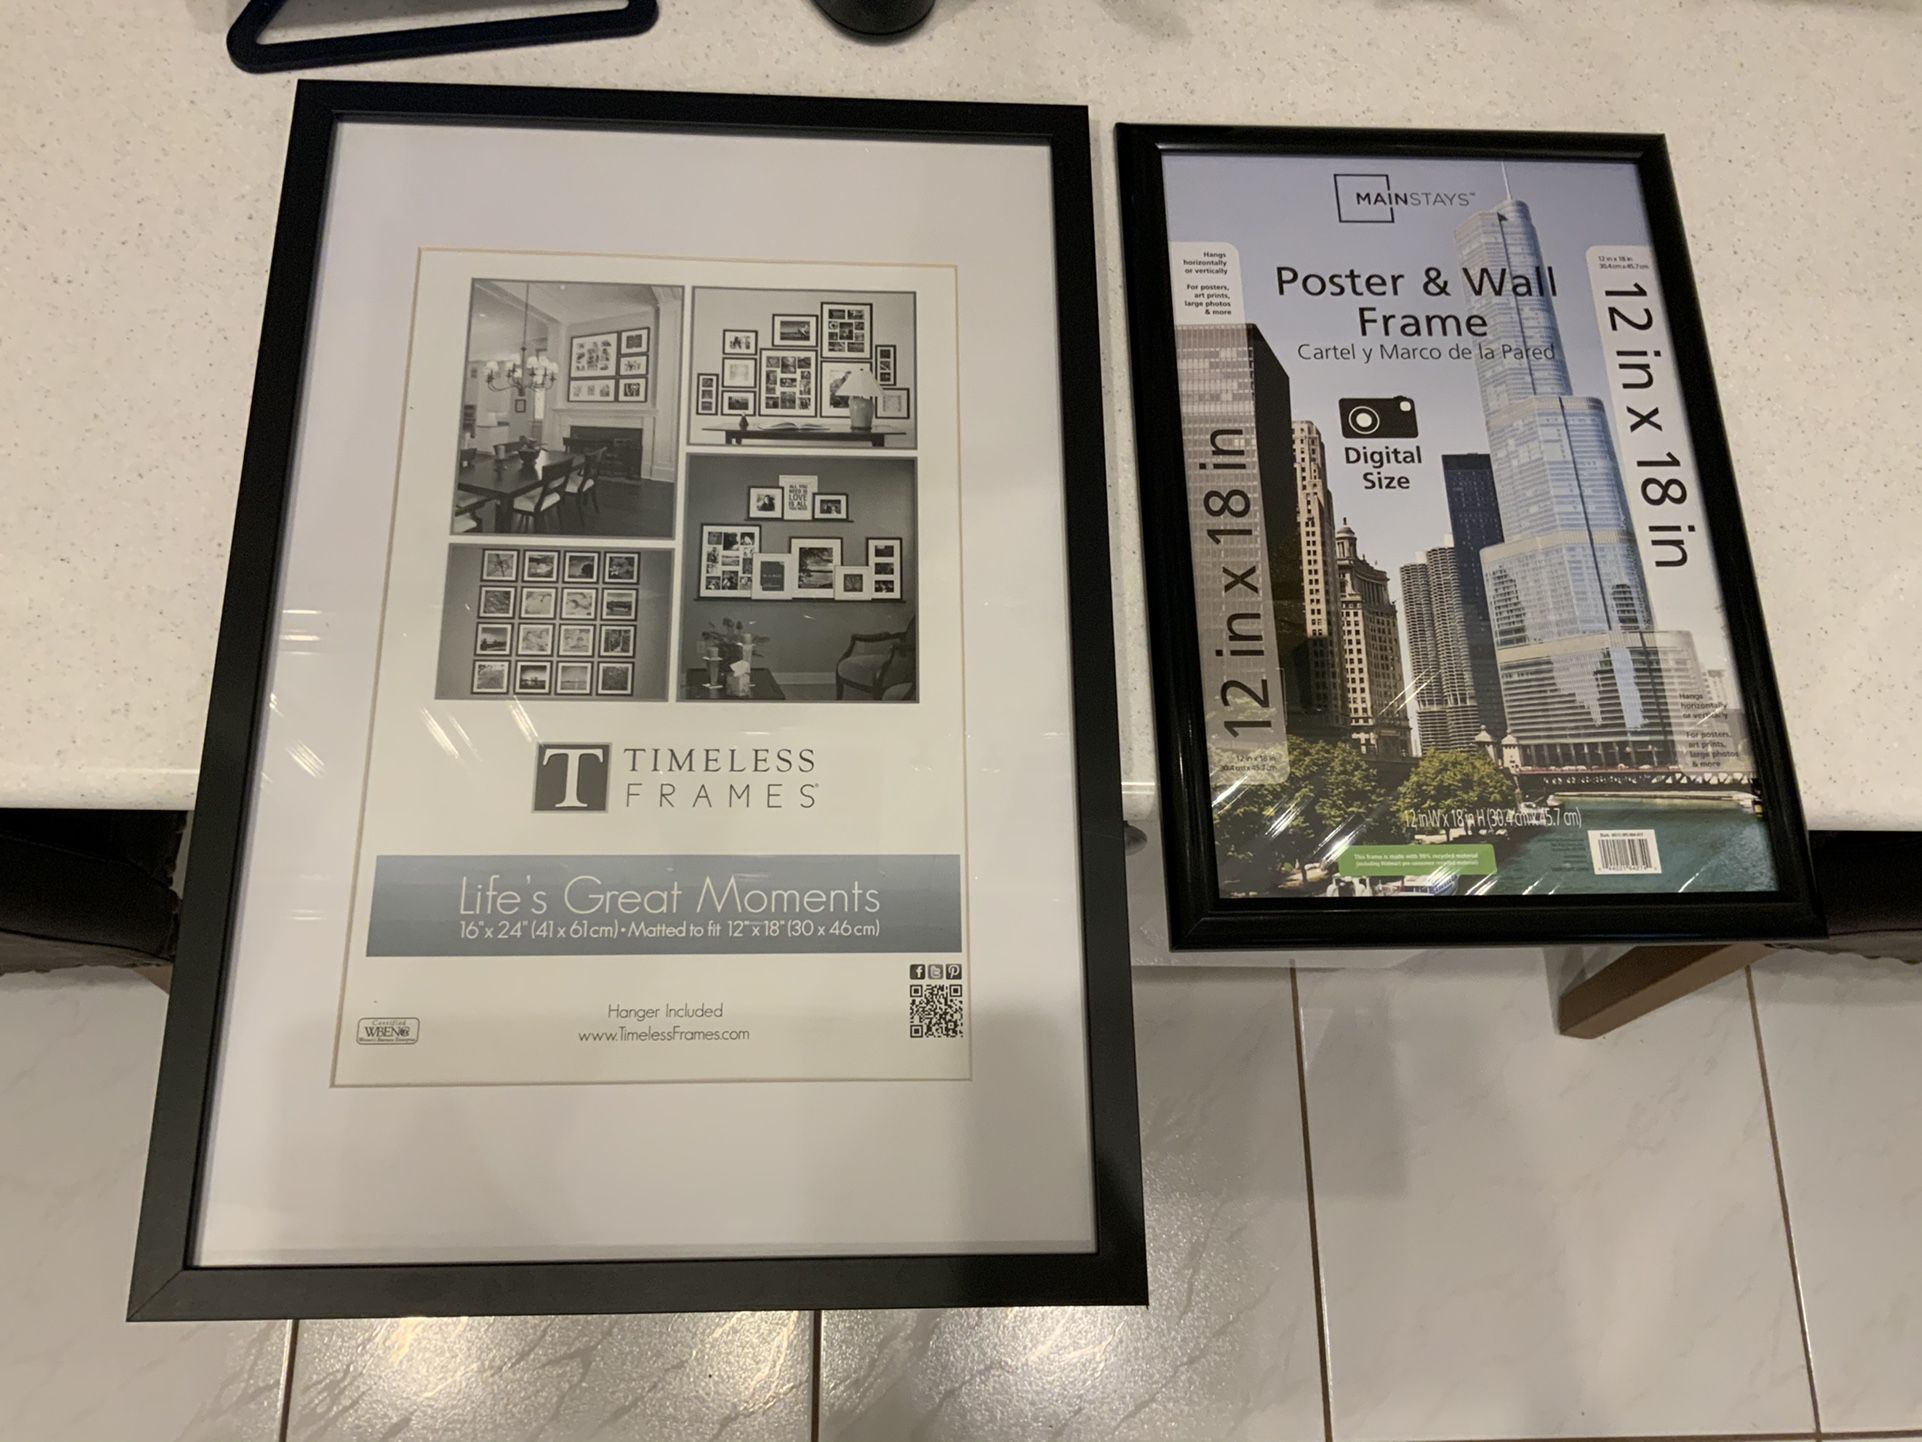 Set Of 2 Black Poster And Wall Frames - $15 Or Best Offer - 2 Sizes - Weston